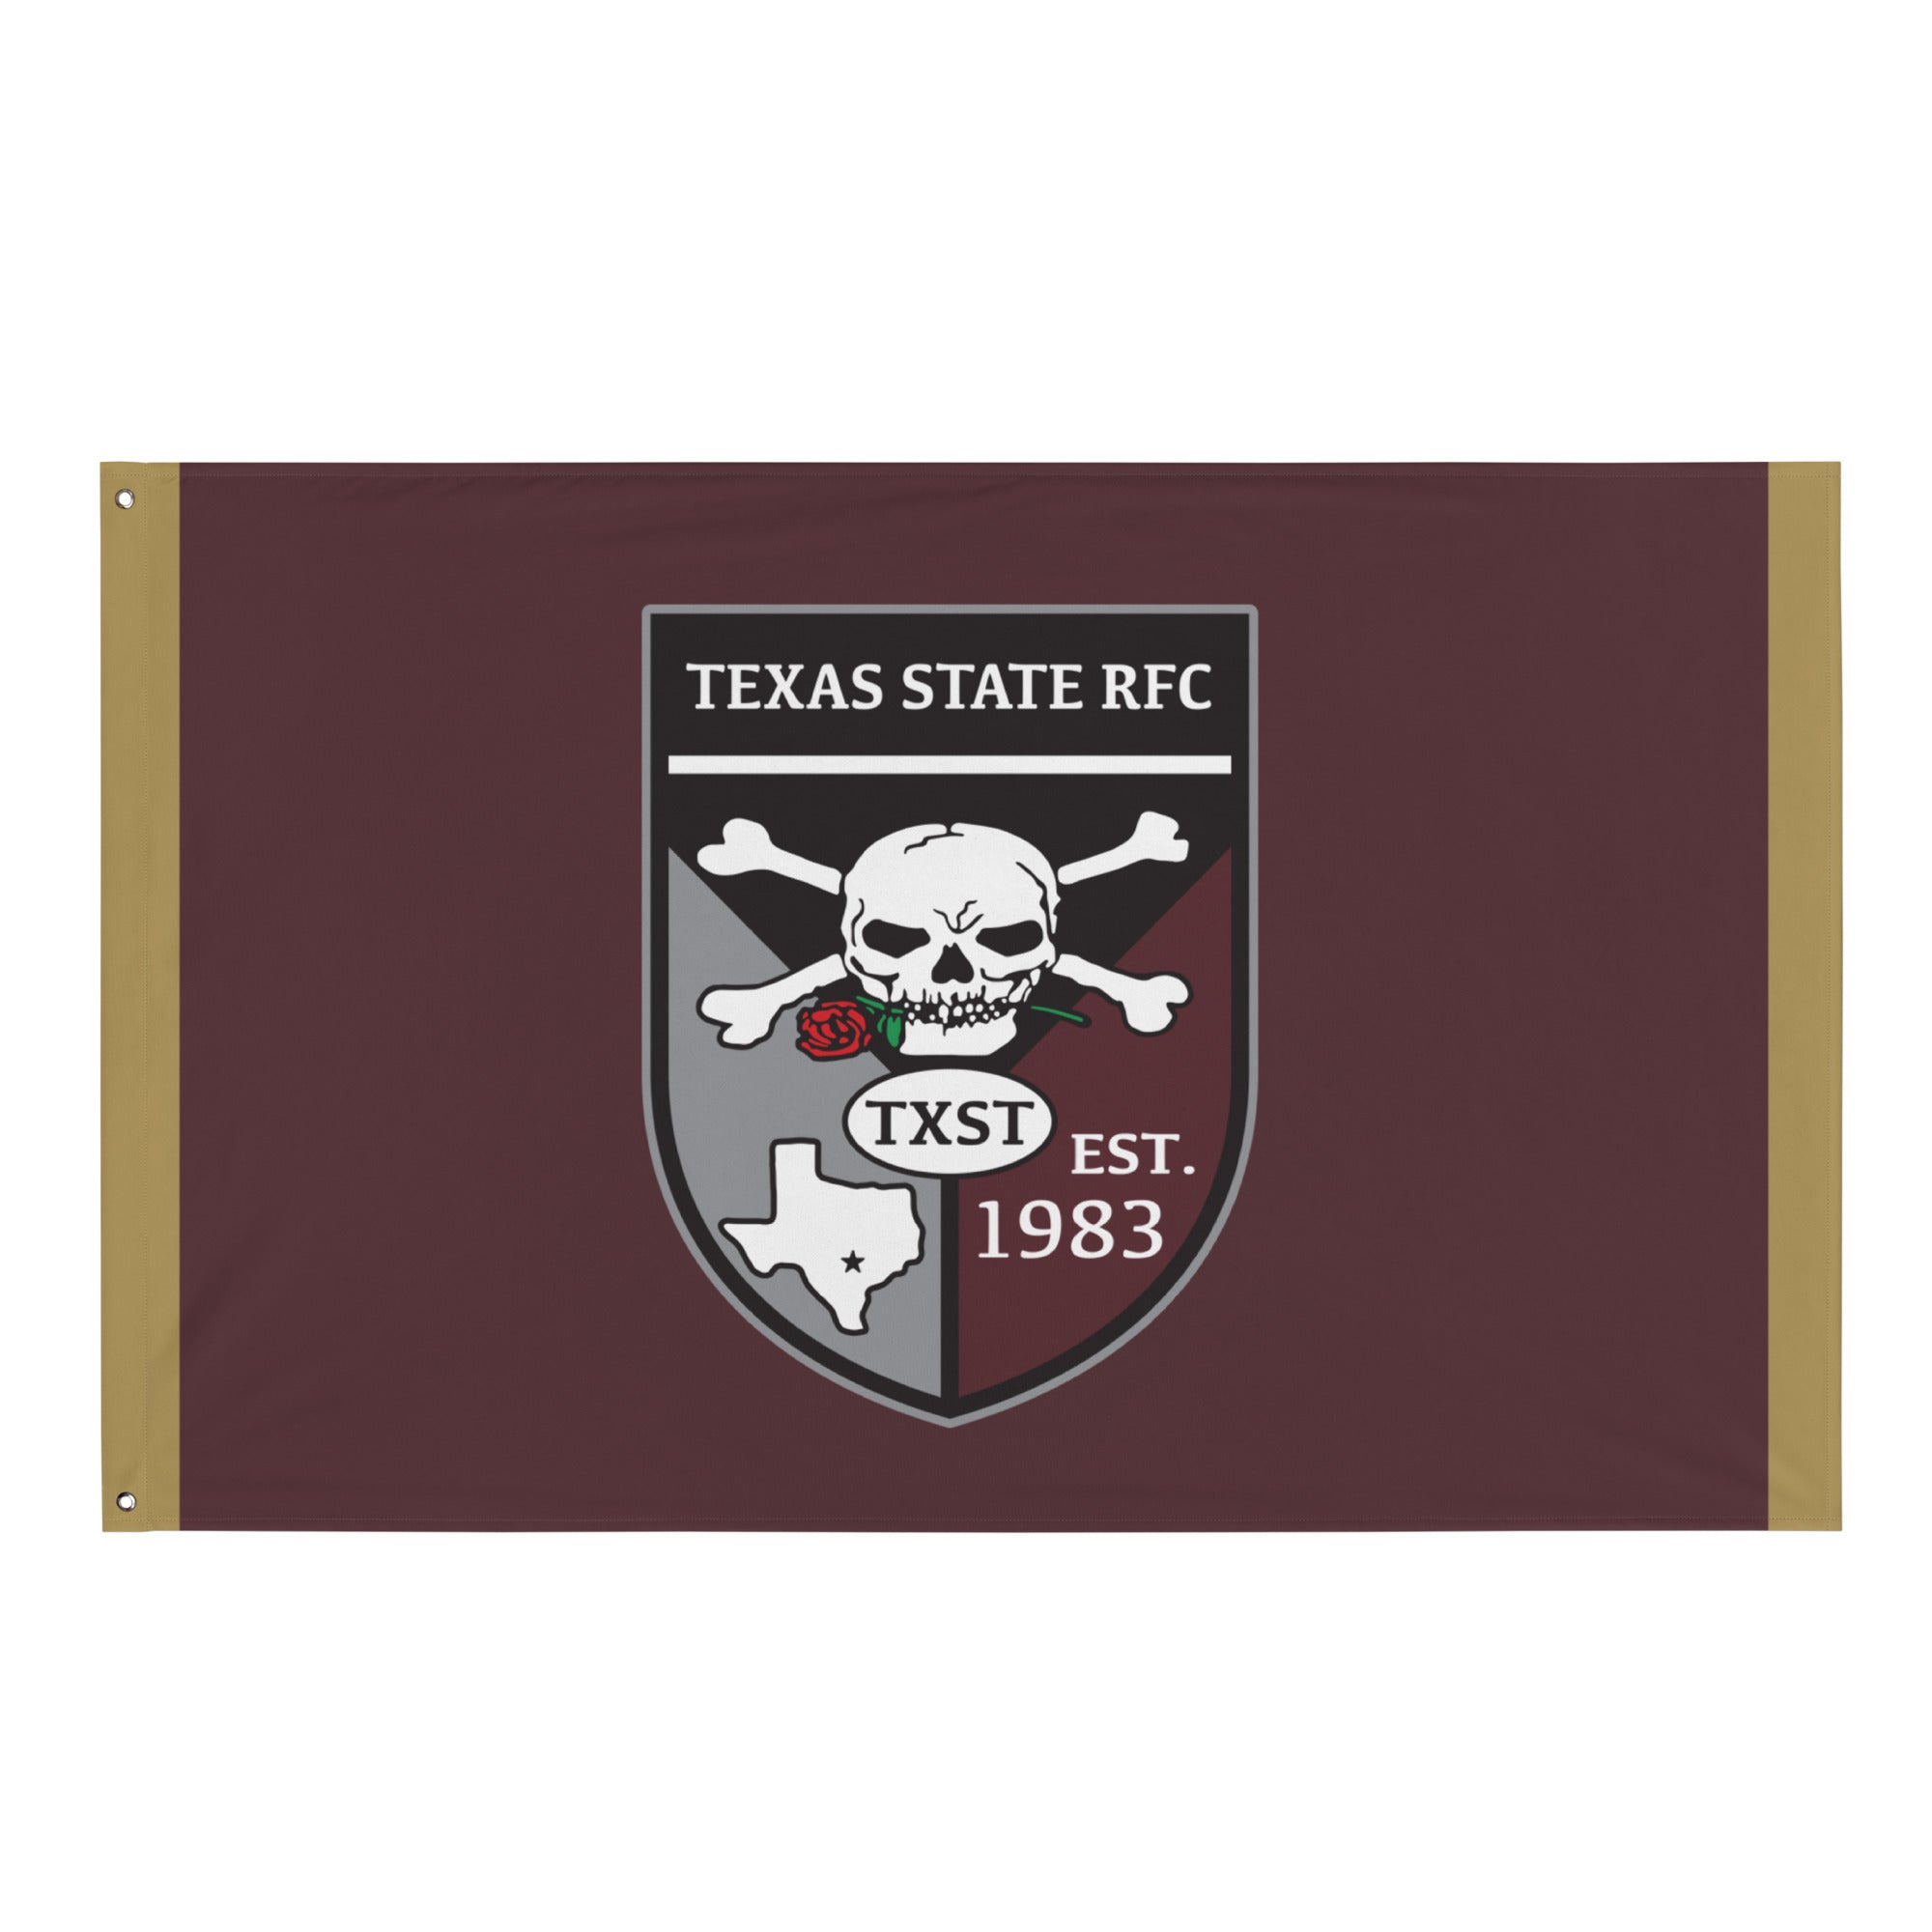 Rugby Imports Texas State Rugby Wall Flag